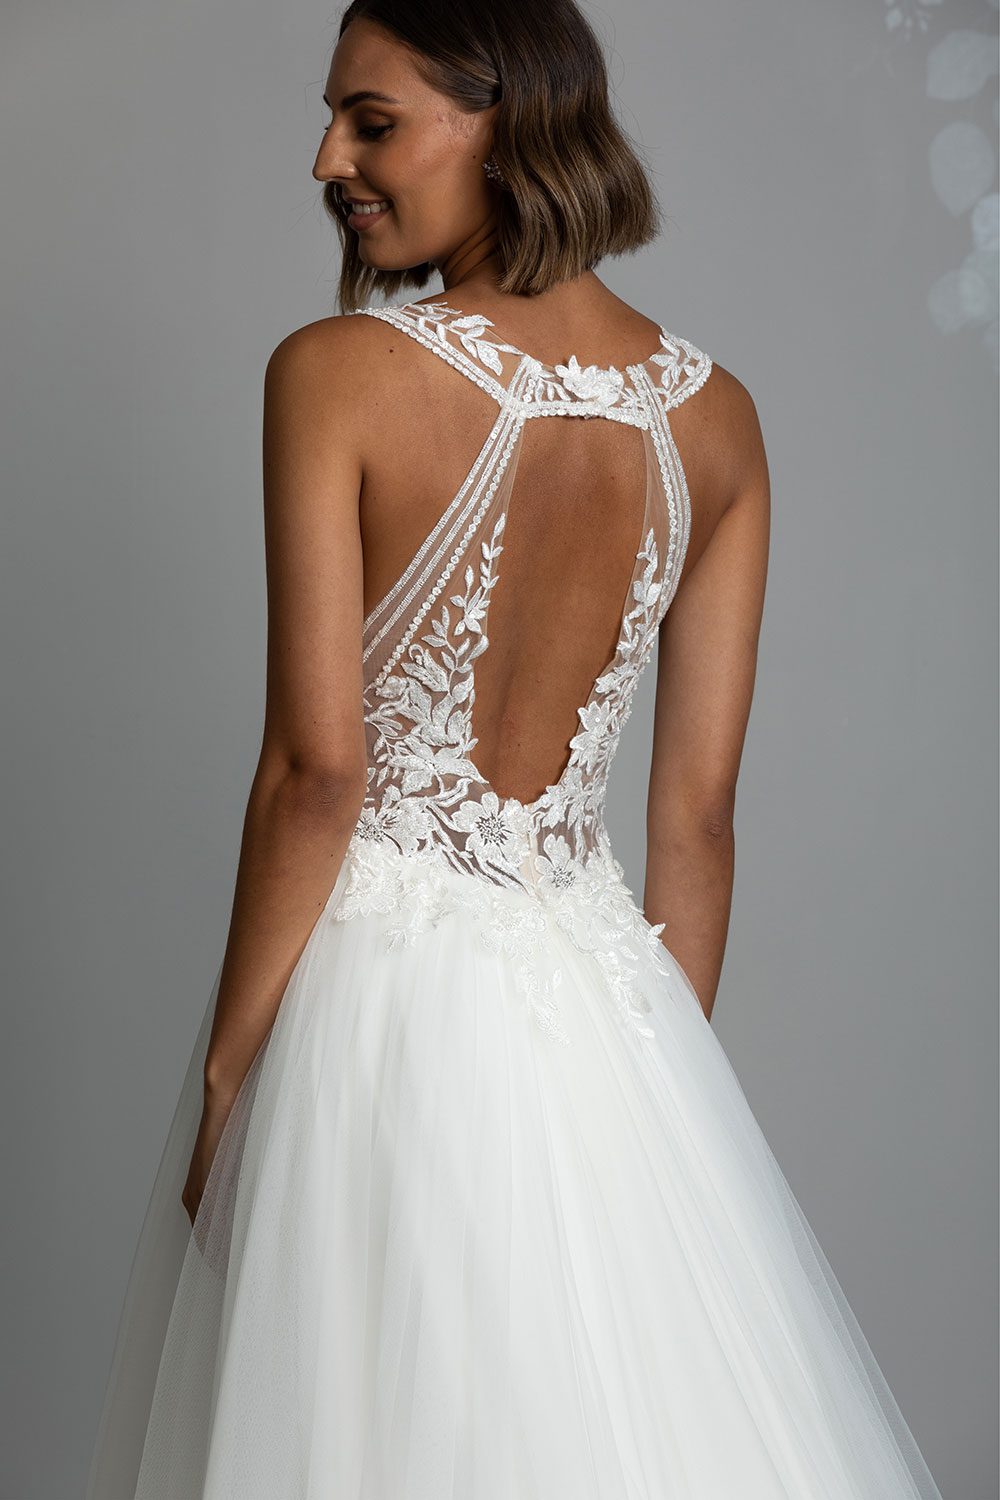 Tia Wedding gown from Vinka Design - This dreamy sculpted wedding dress has a deep V-shaped illusion neckline with beaded floral lace and an open back. The skirt has layers of soft tulle that glide with movement. Close up back view of dress with cut out floral lace open back